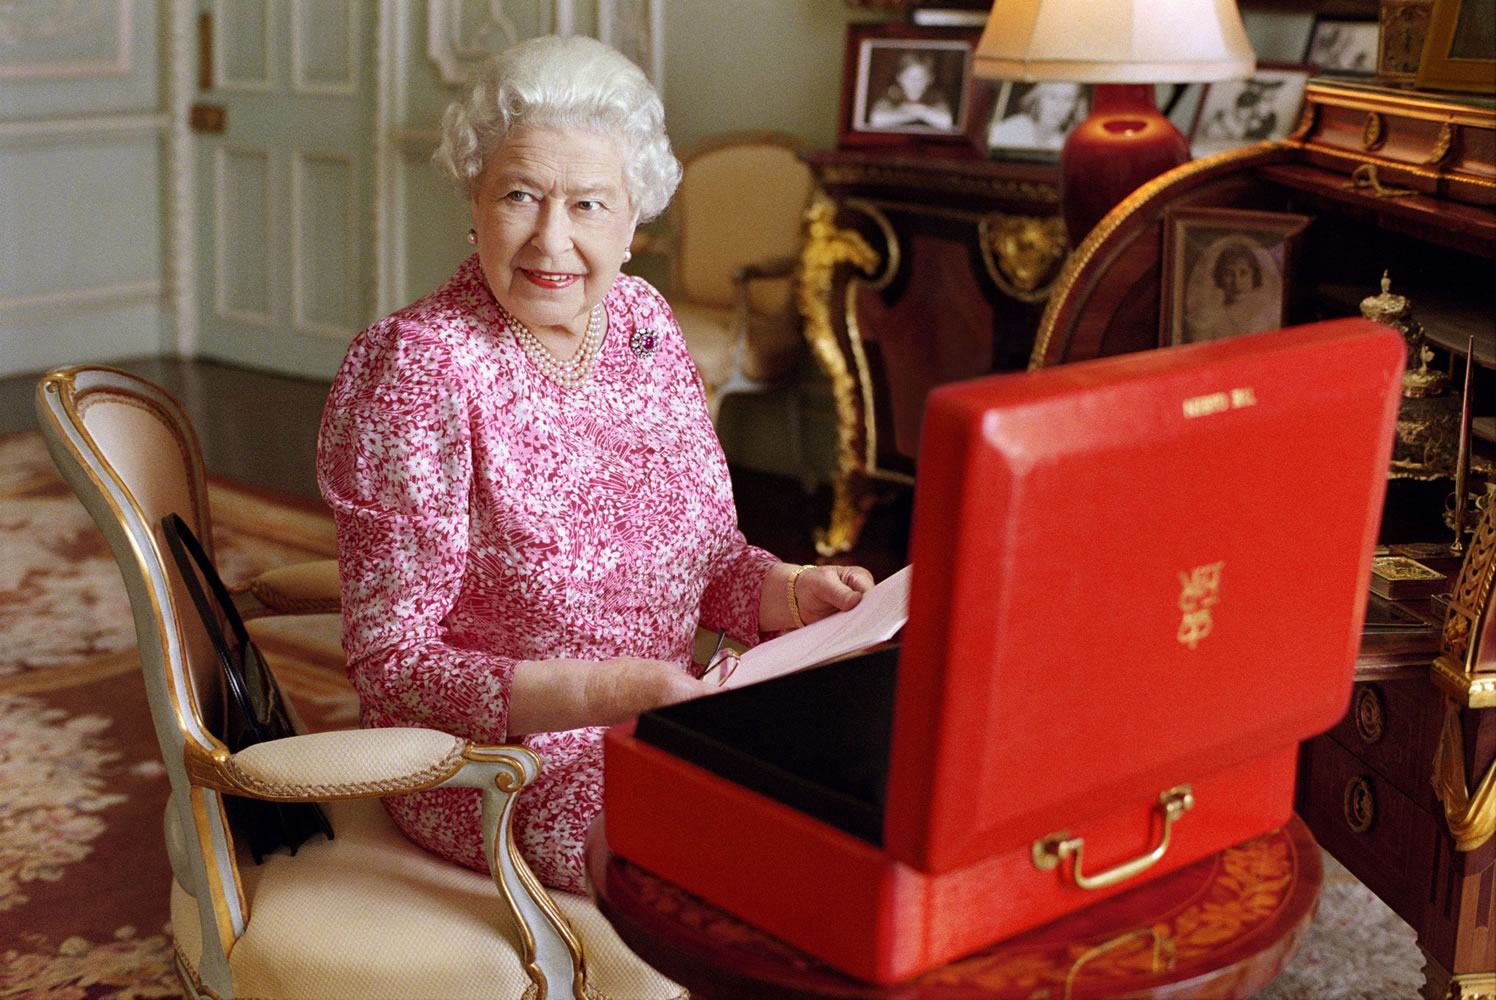 Britain's Queen Elizabeth II sits at her desk in her private audience room at Buckingham Palace in London with one of her official red boxes that she has received almost every day of her reign. It contains important papers from government ministers in the United Kingdom and her Realms and from her representatives across the Commonwealth and beyond.